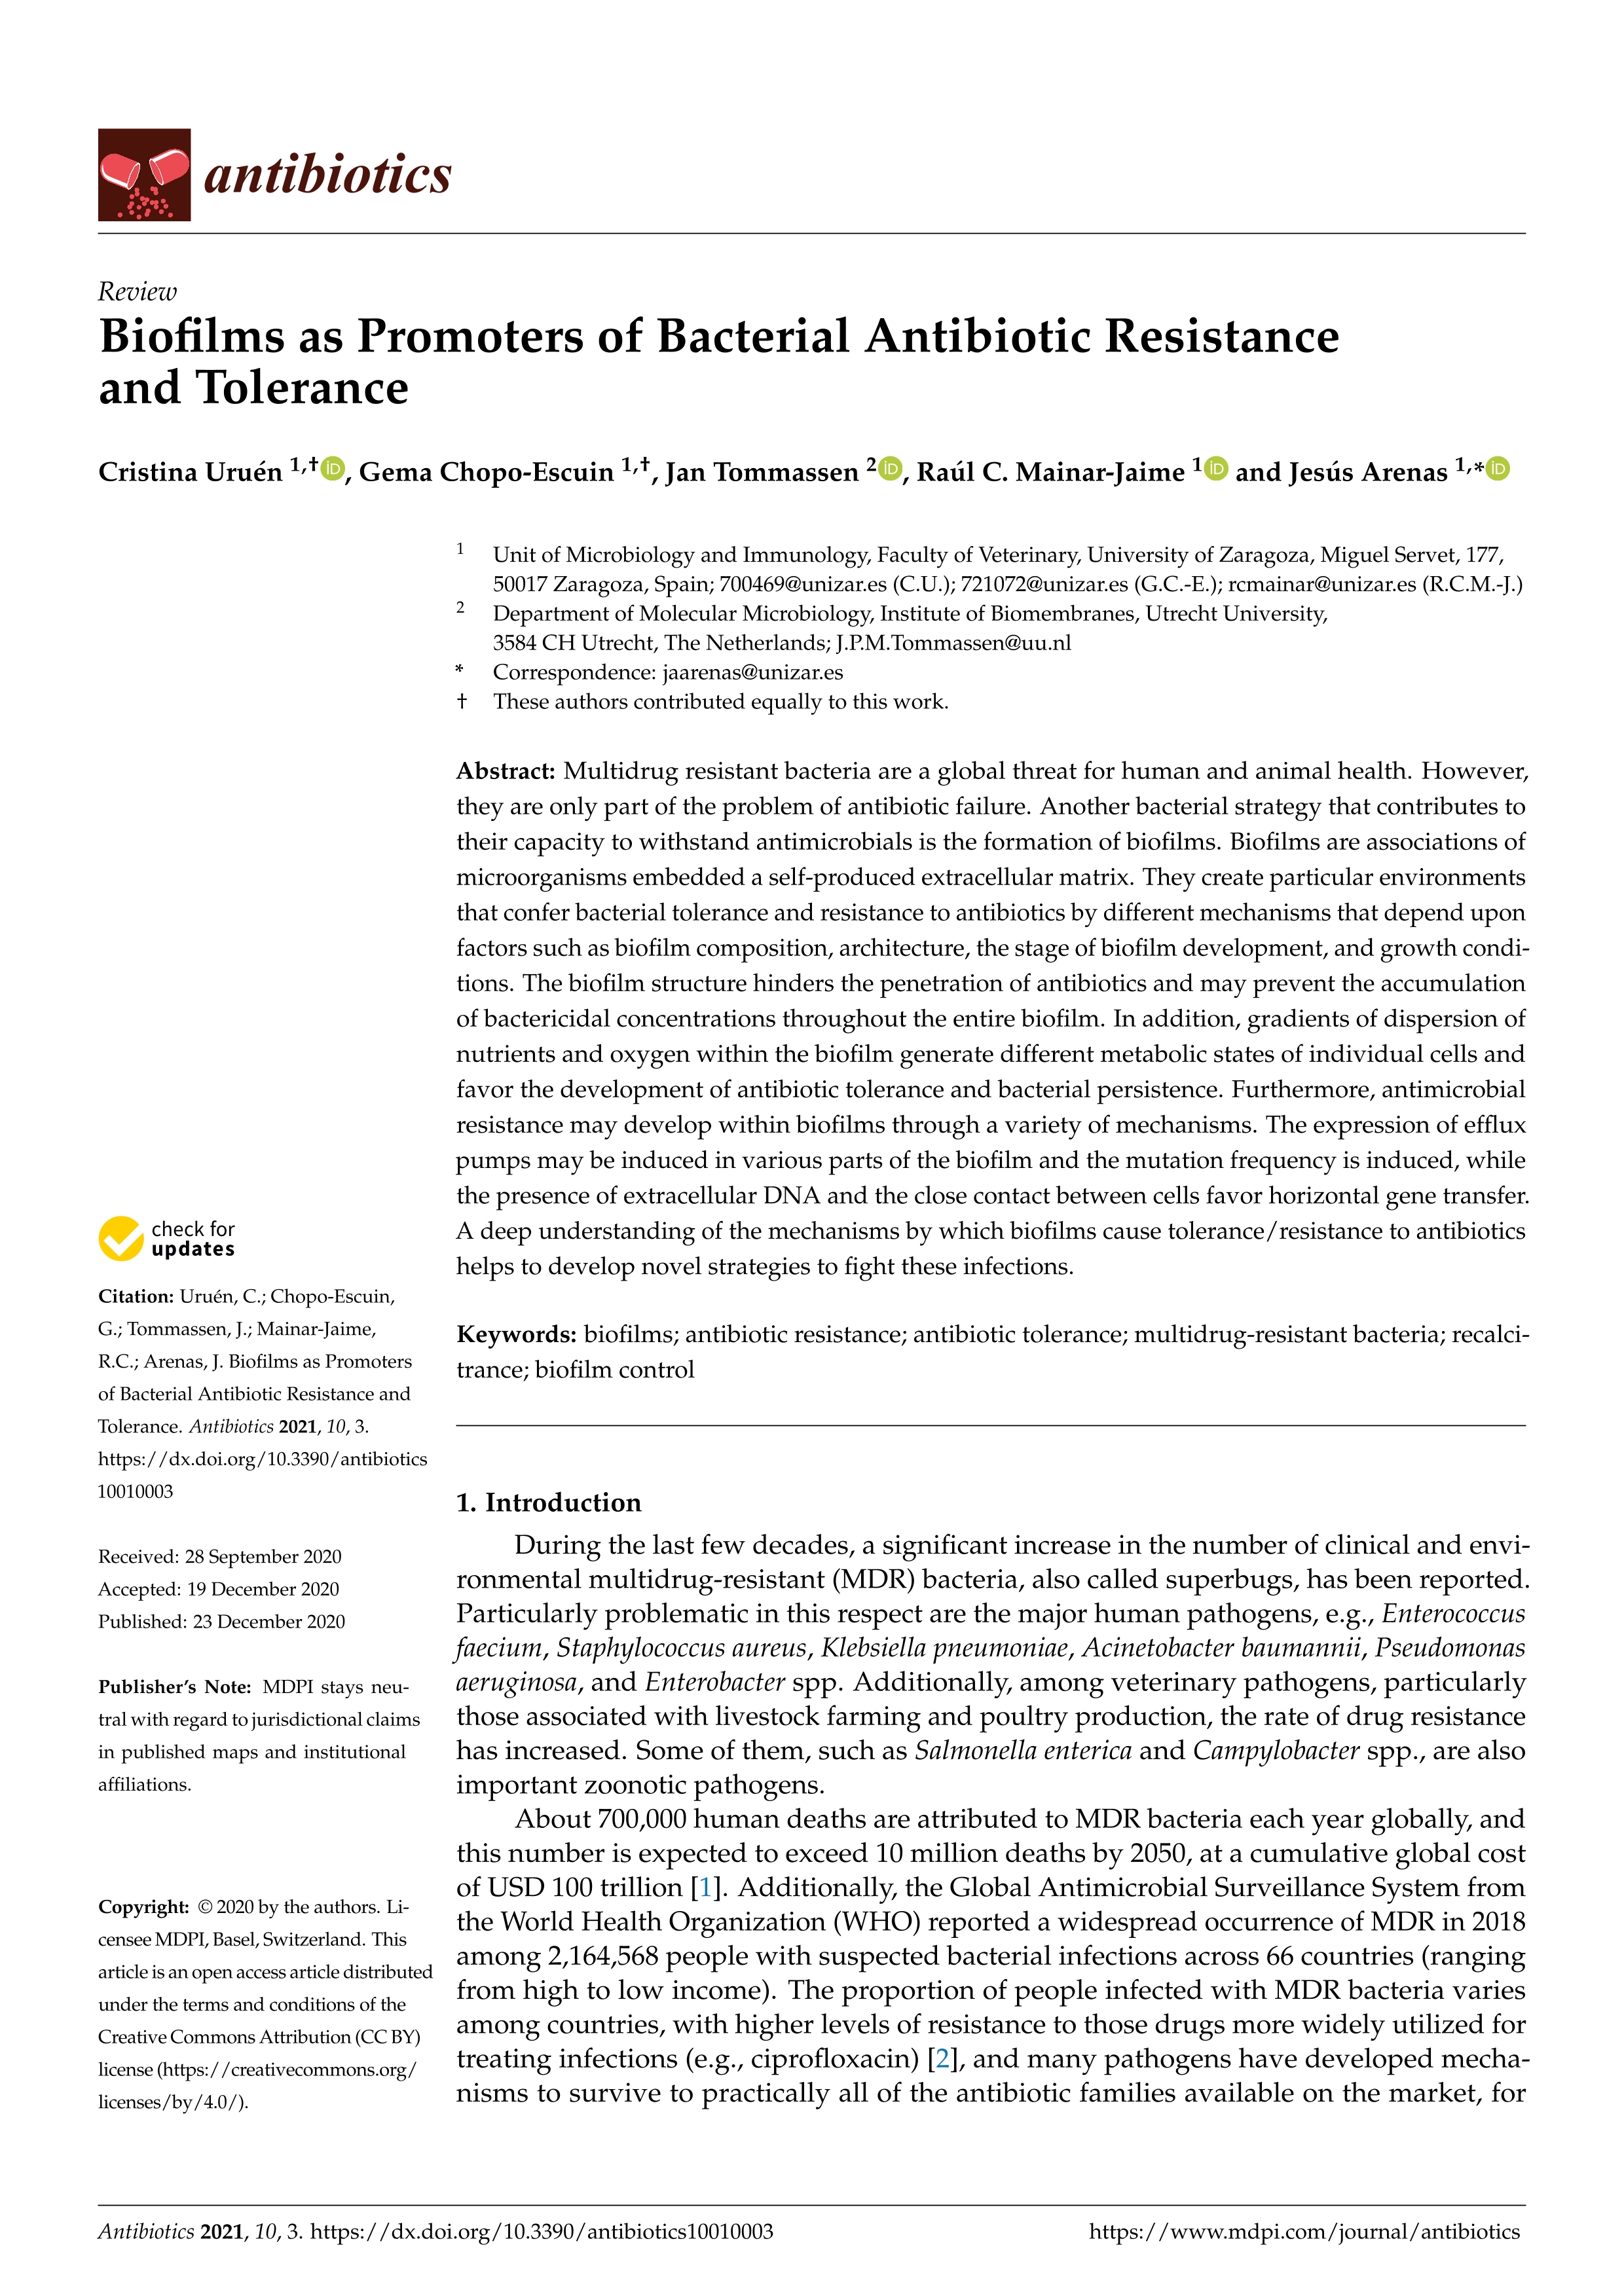 Biofilms as promoters of bacterial antibiotic resistance and tolerance